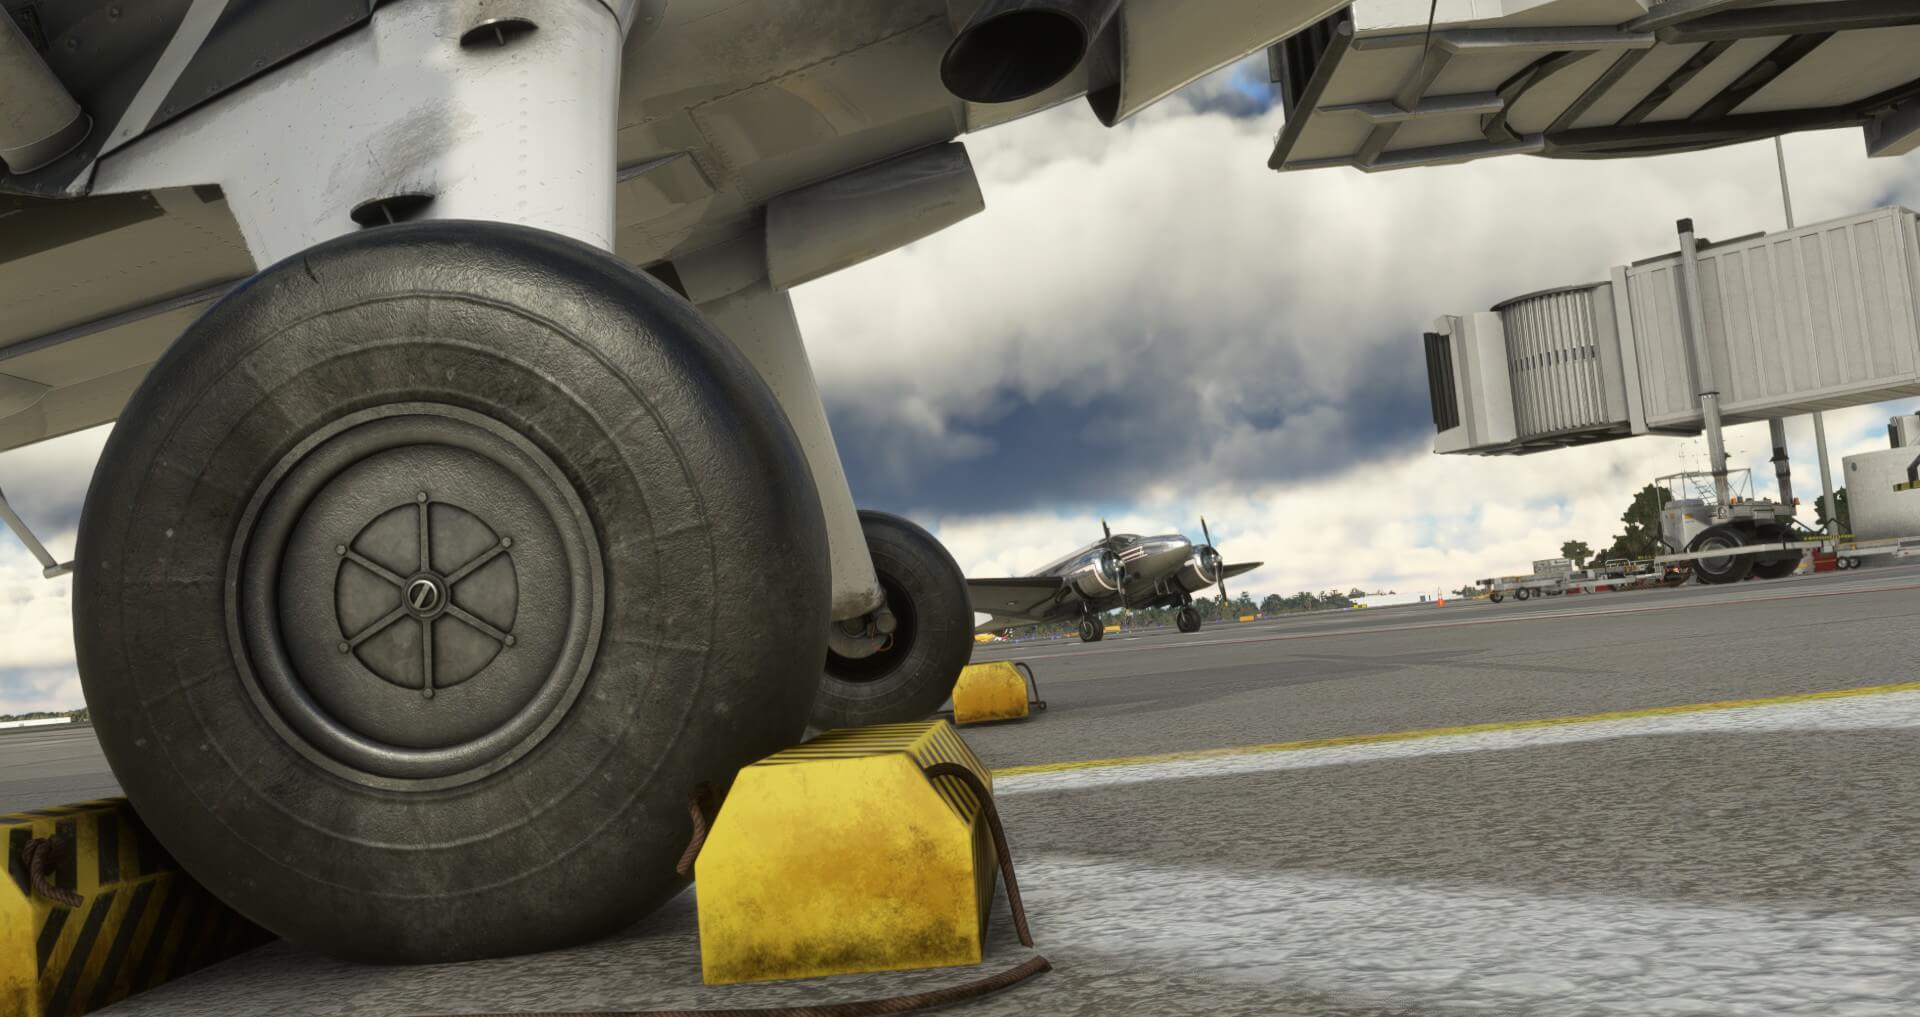 A close up shot of an aircrafts landing gear with chocks in place on the apron.